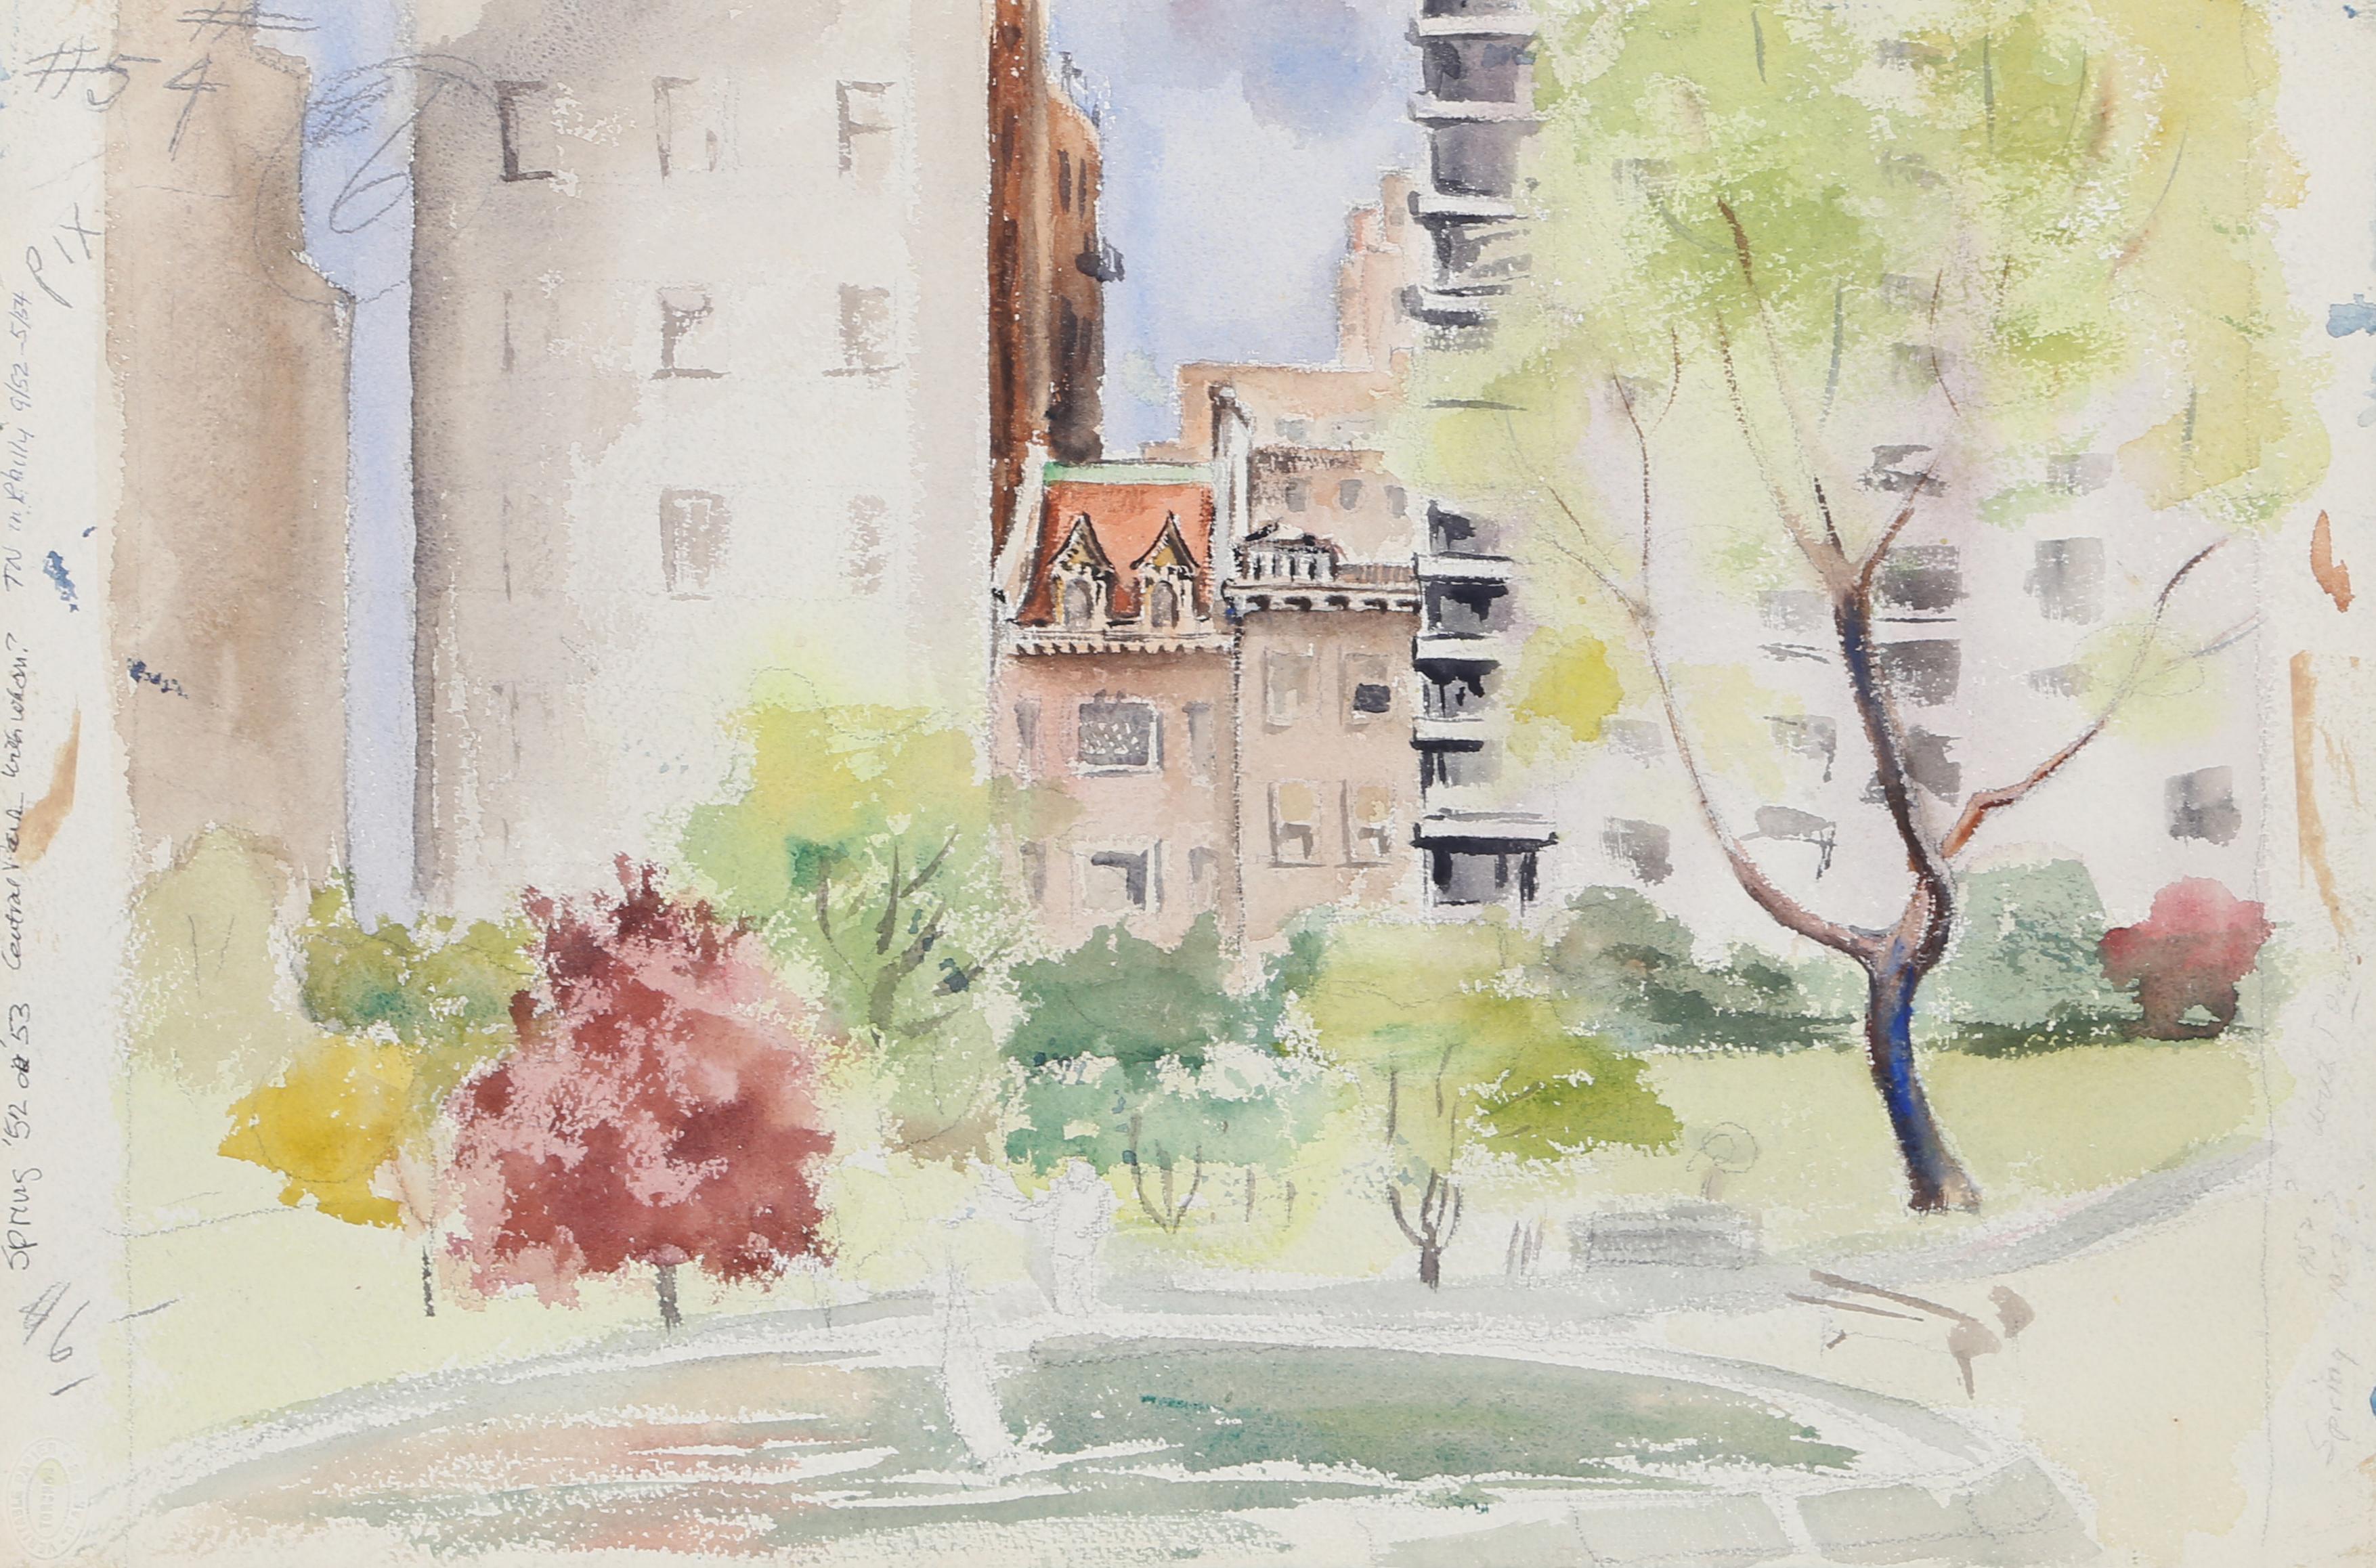 Artist: Eve Nethercott, American (1925 - )
Title: Hampton Bays (P6.63)
Year: 1958
Medium: Double-Sided Watercolor on Paper, annotated by the artist
Size: 15 x 22 in. (38.1 x 55.88 cm)

Other side 